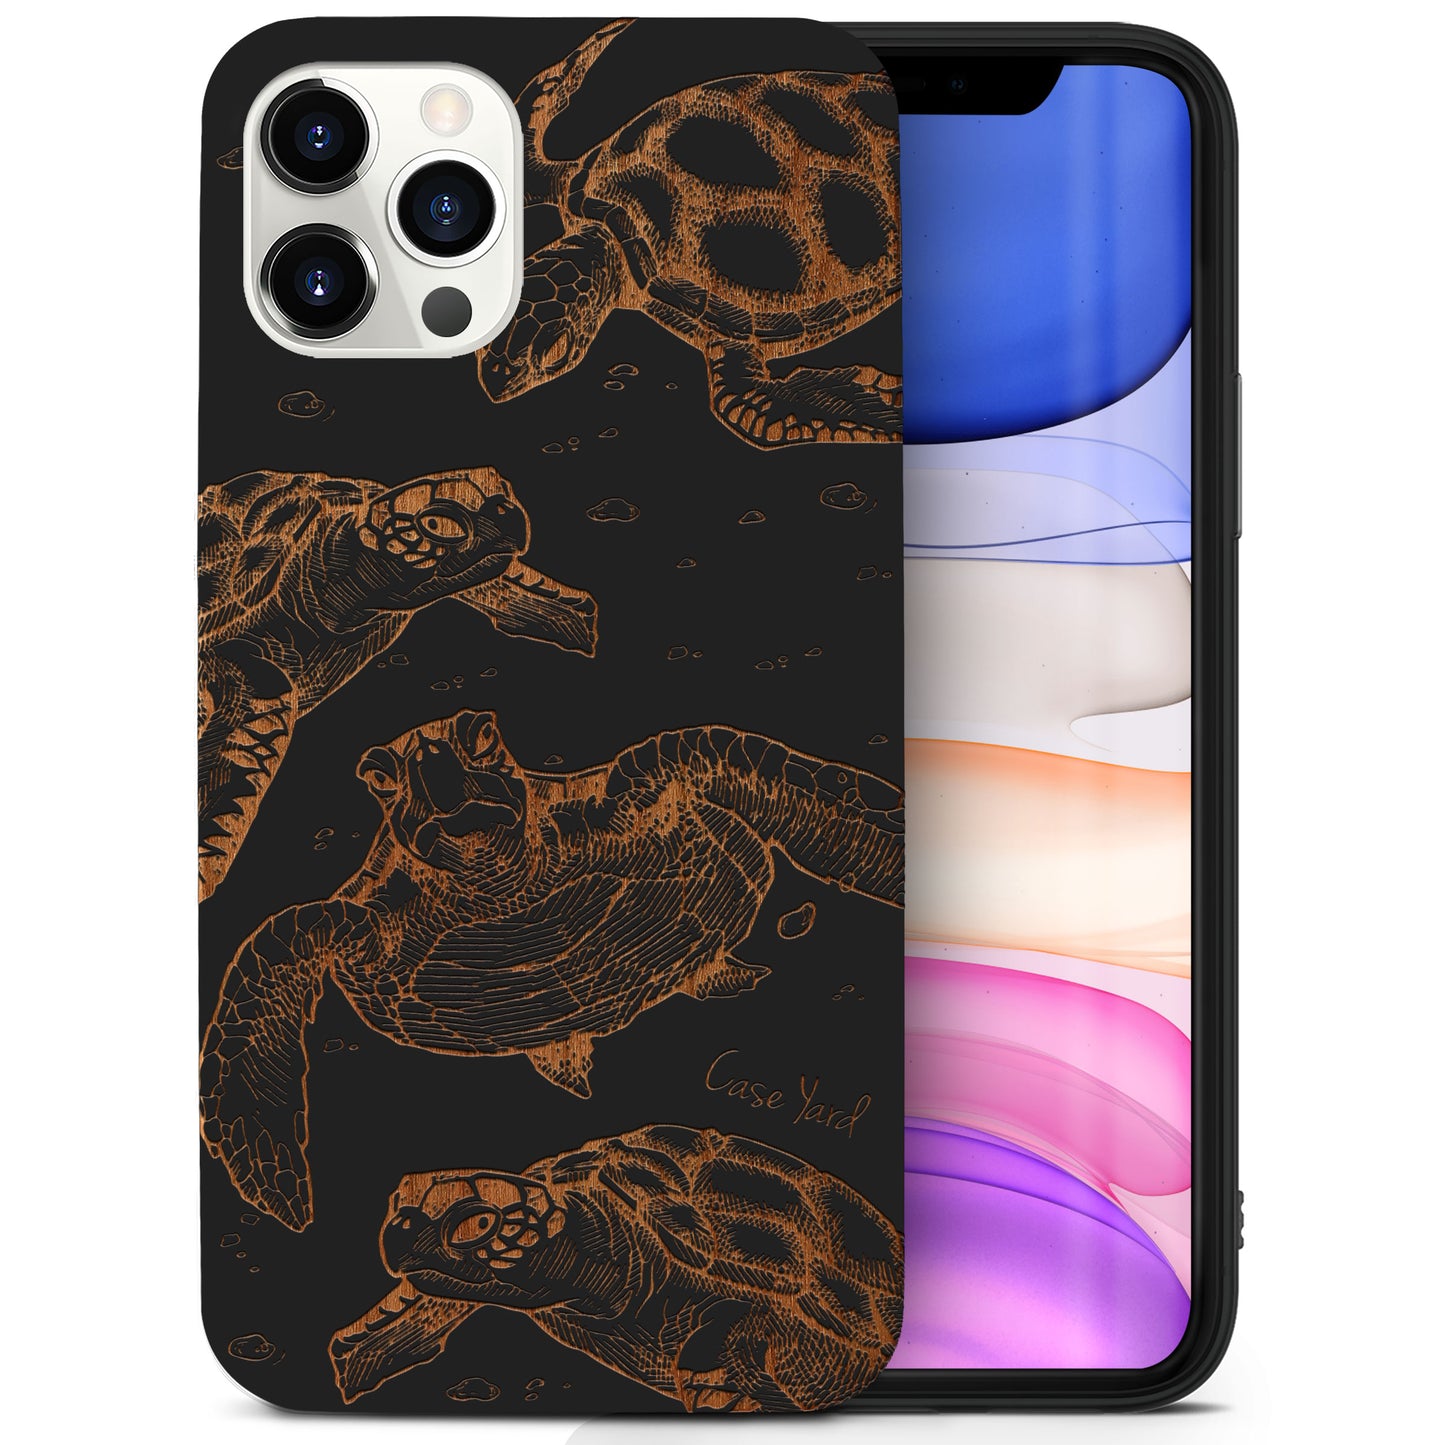 Wooden Cell Phone Case Cover, Laser Engraved case for iPhone & Samsung phone Tortugas Design